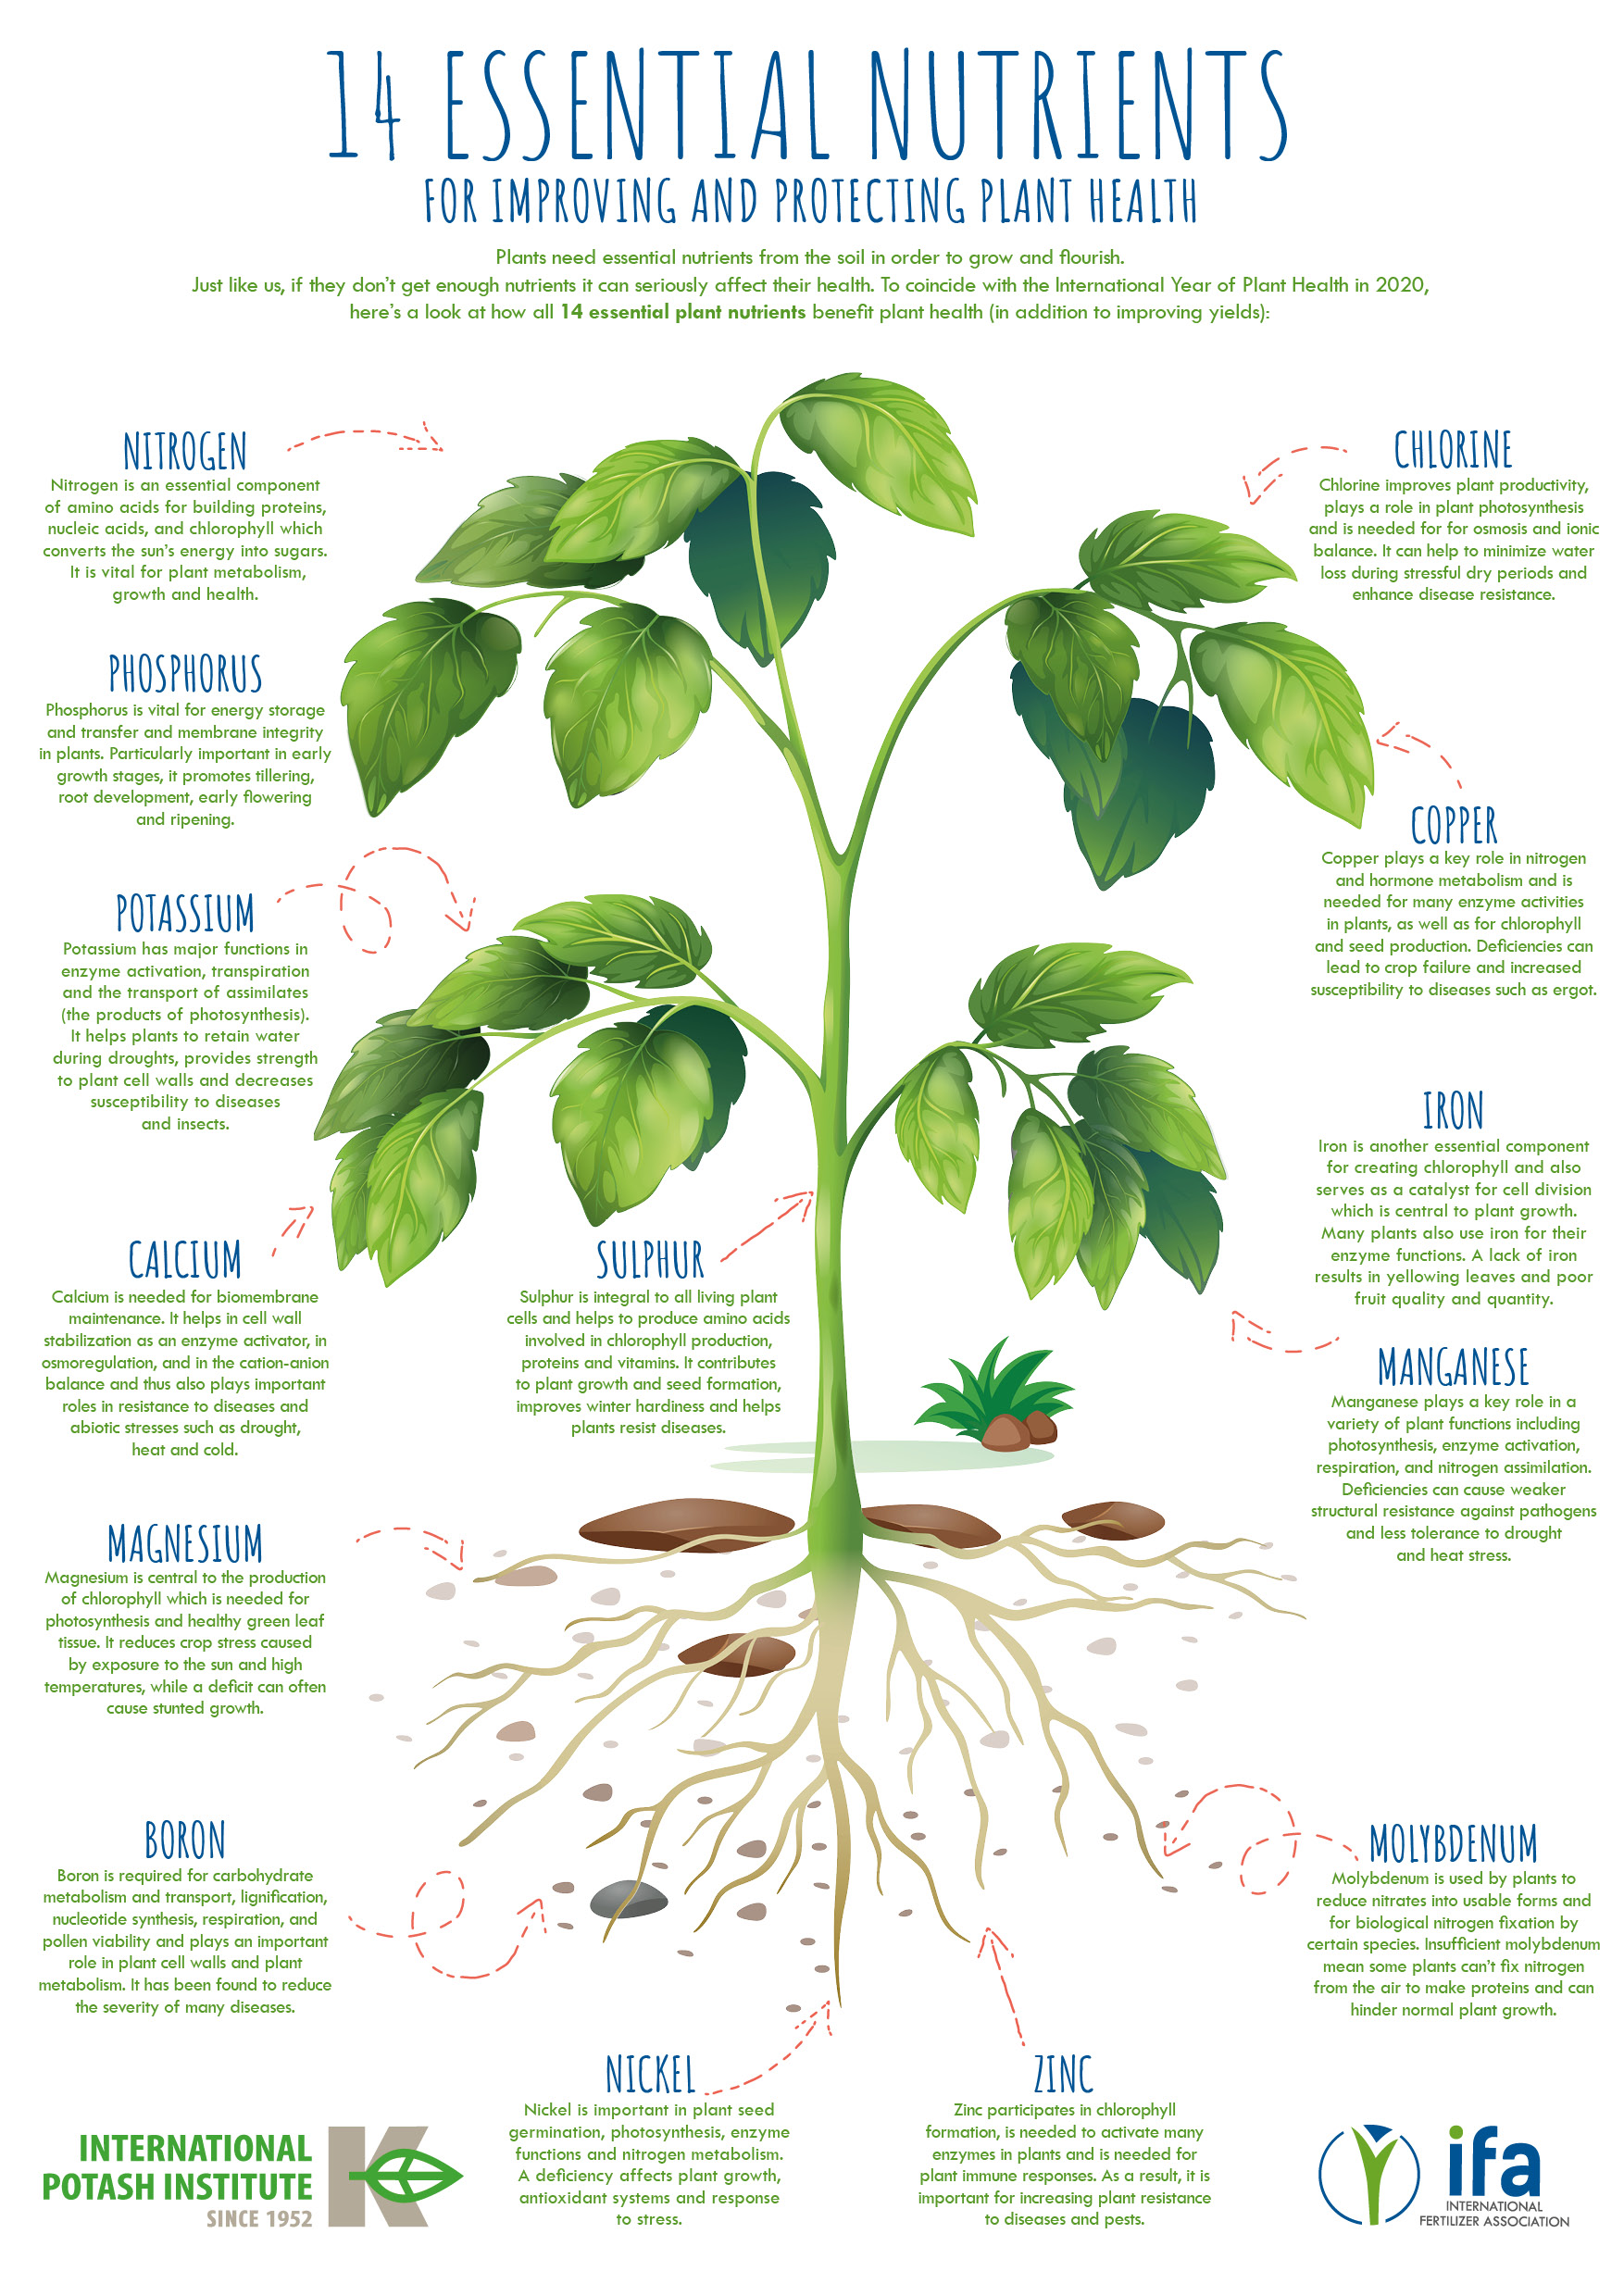 Essential Nutrients for Improving and Protecting Plant Health